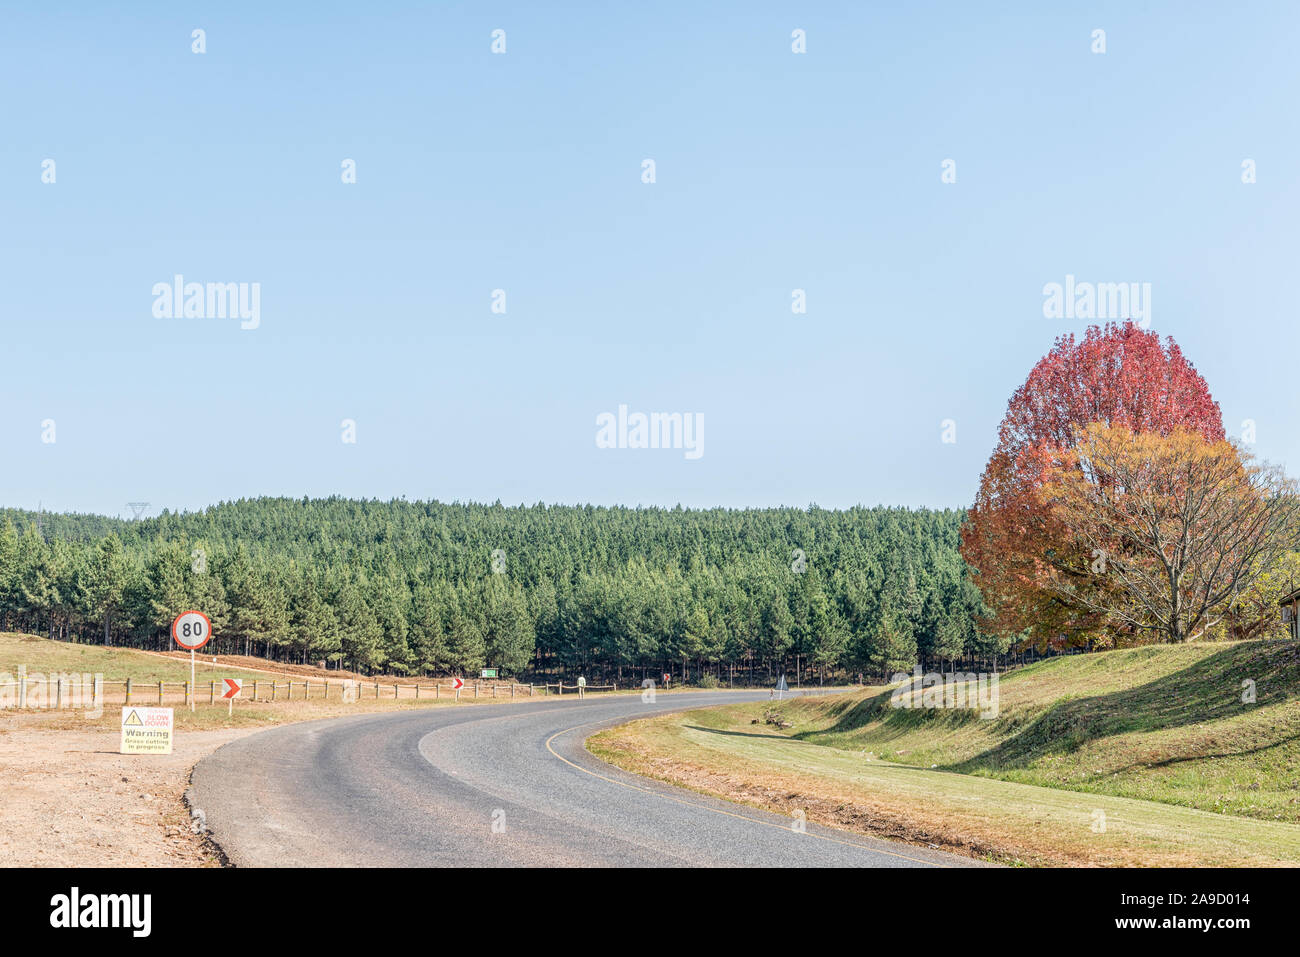 A view of the landscape on road R532 between Sabie and Lydenburg. A speed limitl sign, pine tree plantations and a tree in autumn colors are visible Stock Photo